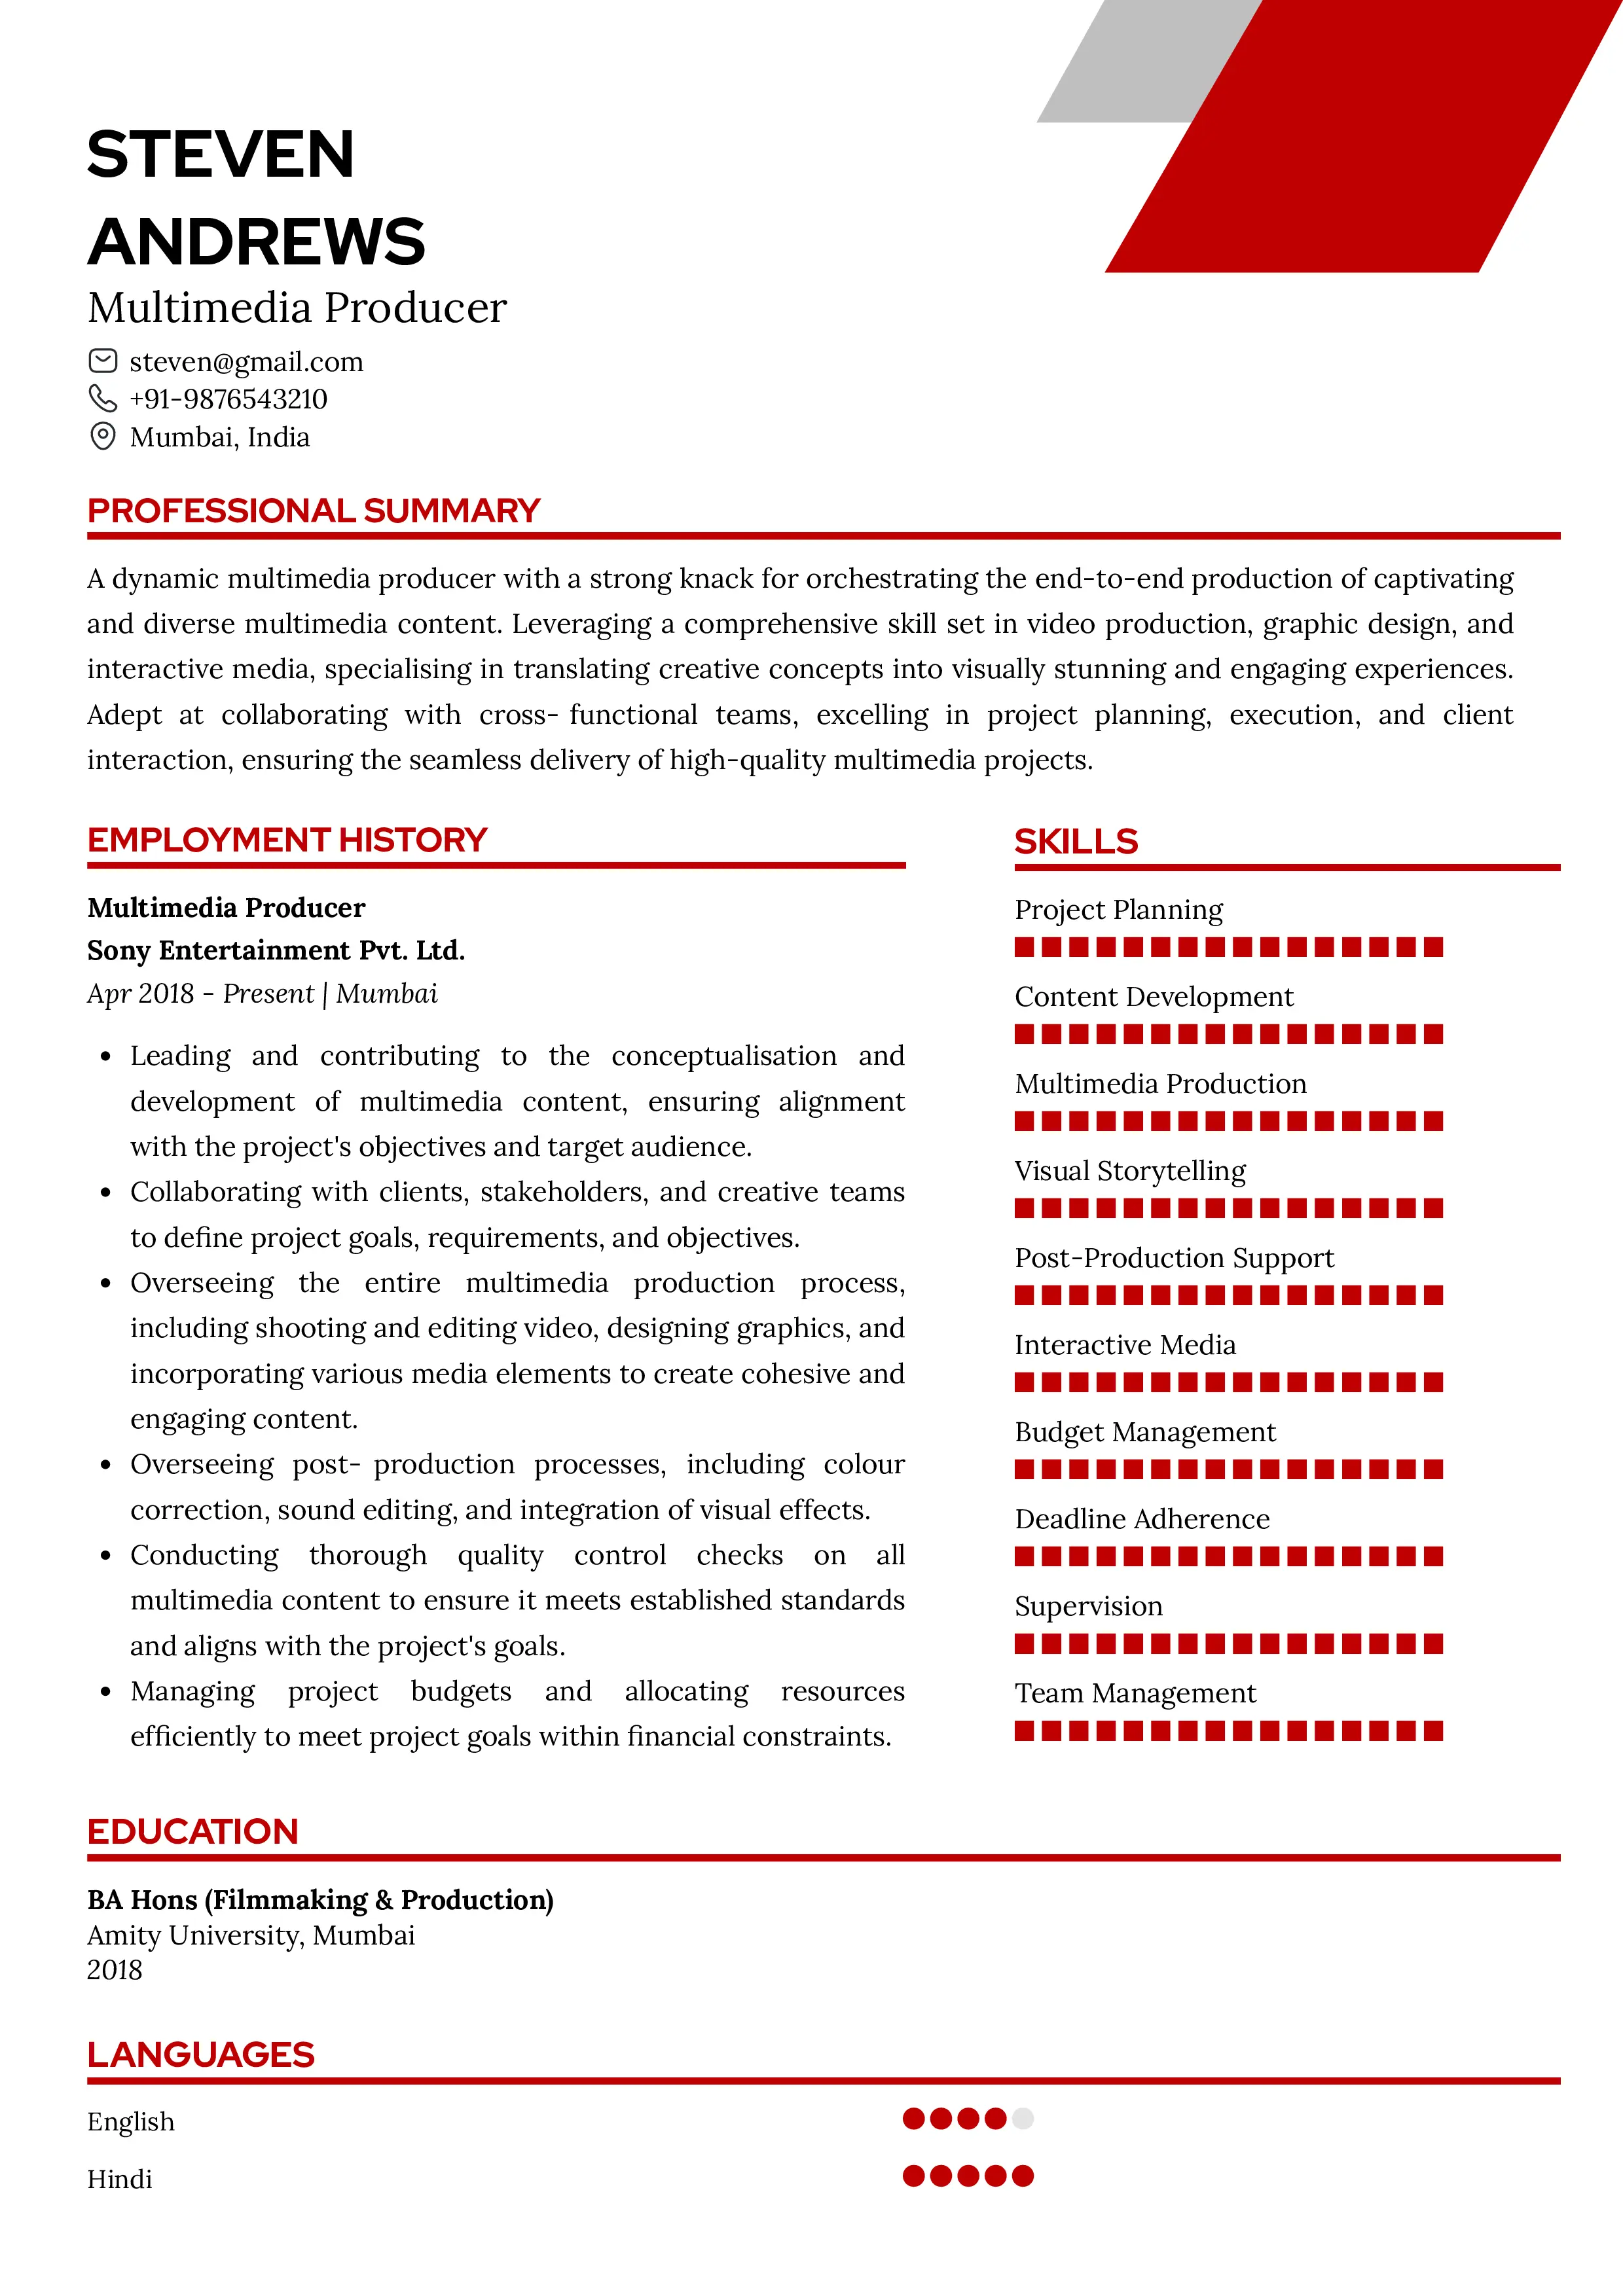 Sample Resume of Multimedia Producer | Free Resume Templates & Samples on Resumod.co